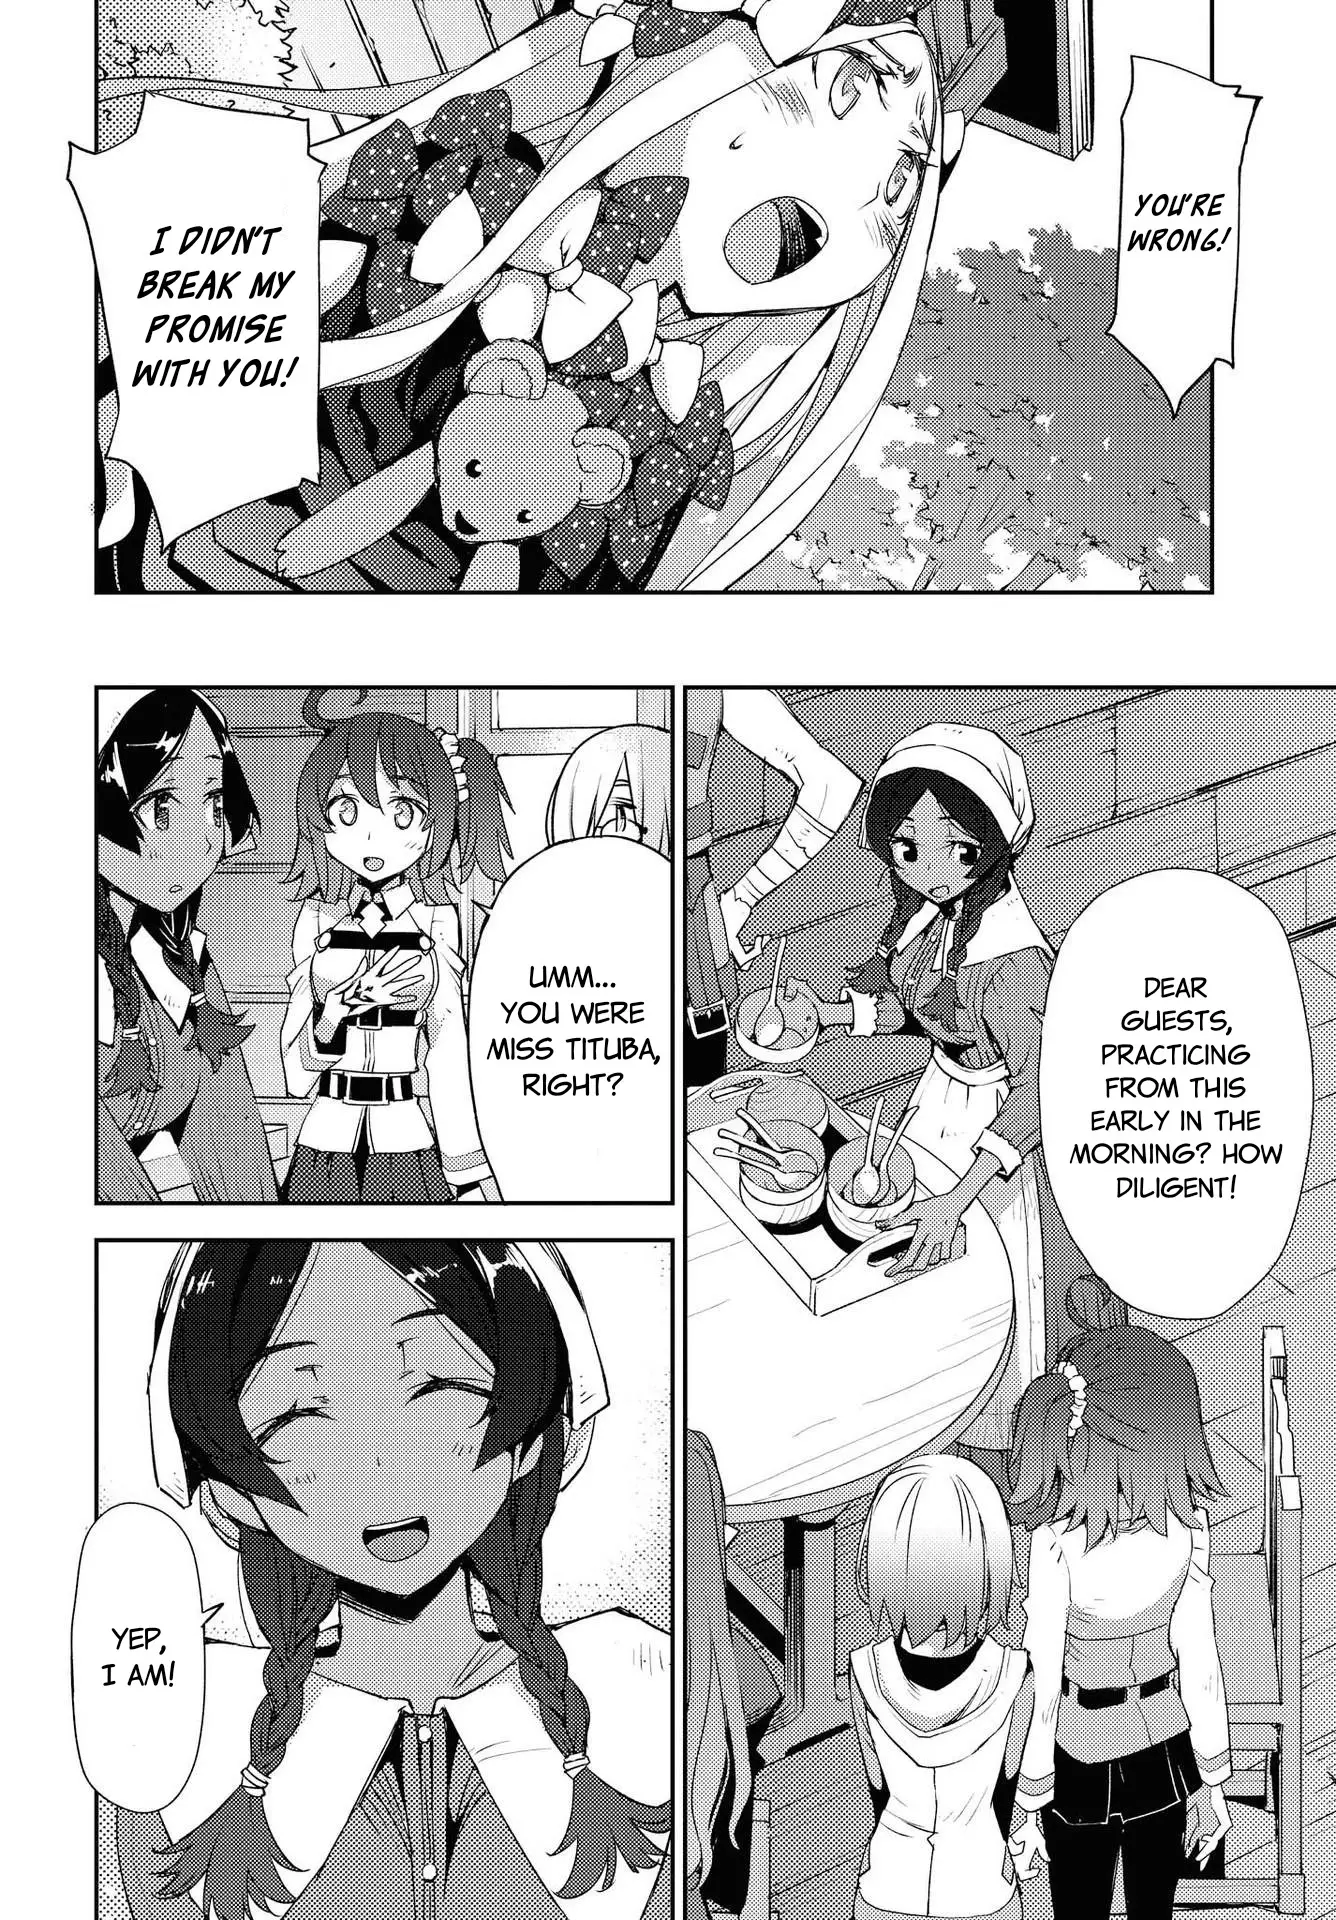 Fate/grand Order: Epic Of Remnant - Subspecies Singularity Iv: Taboo Advent Salem: Salem Of Heresy - 4 page 4